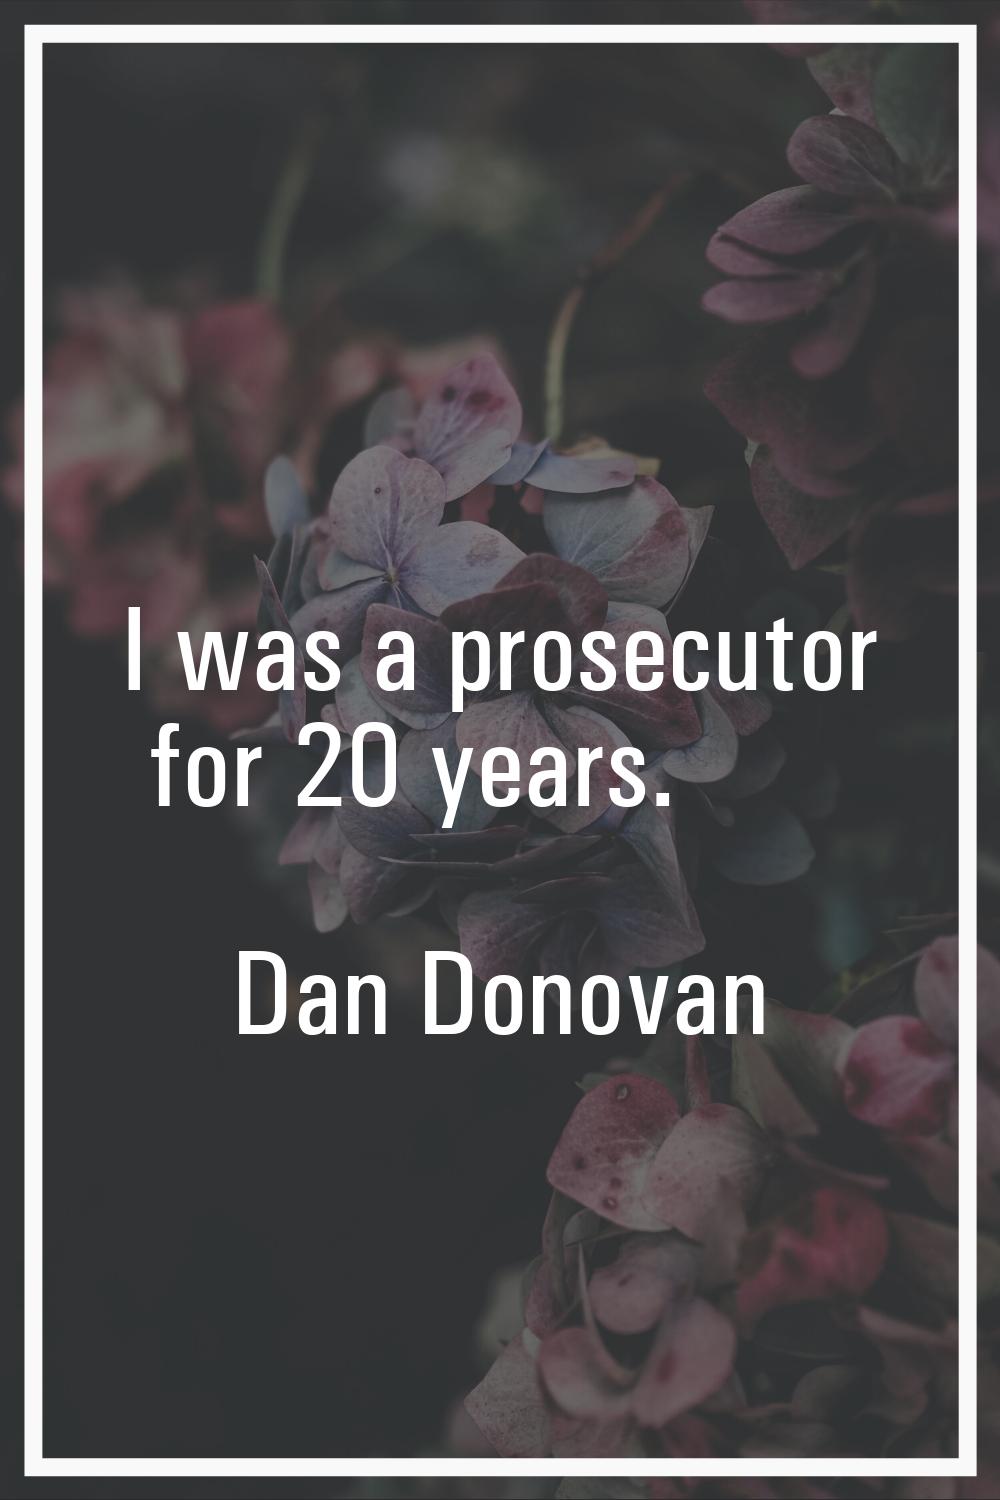 I was a prosecutor for 20 years.